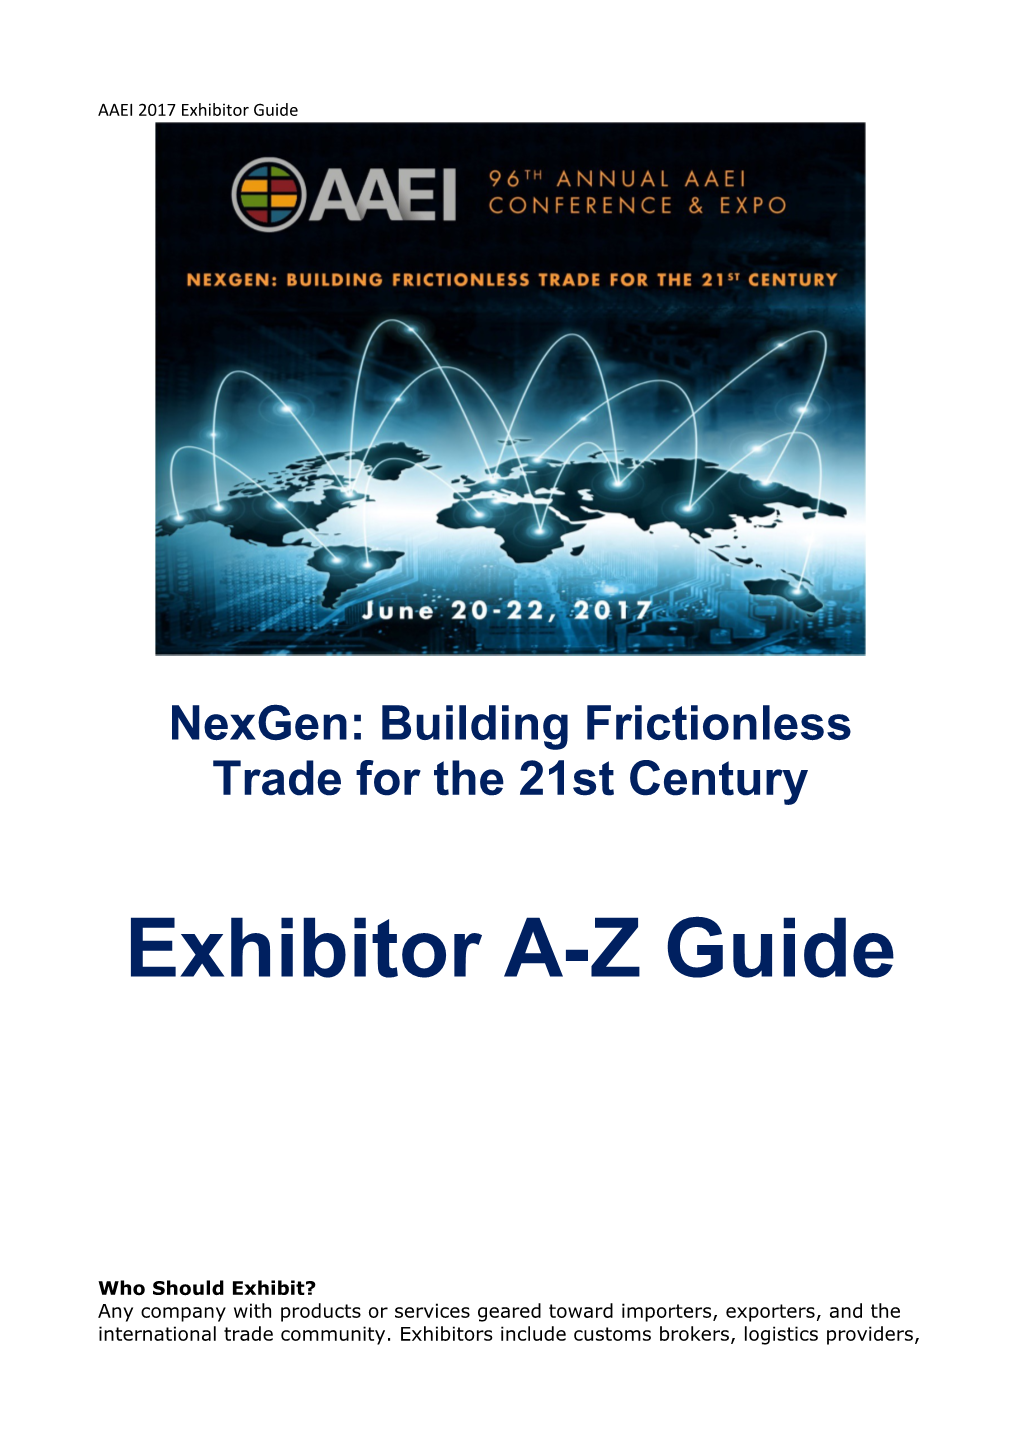 Nexgen: Building Frictionless Trade for the 21St Century